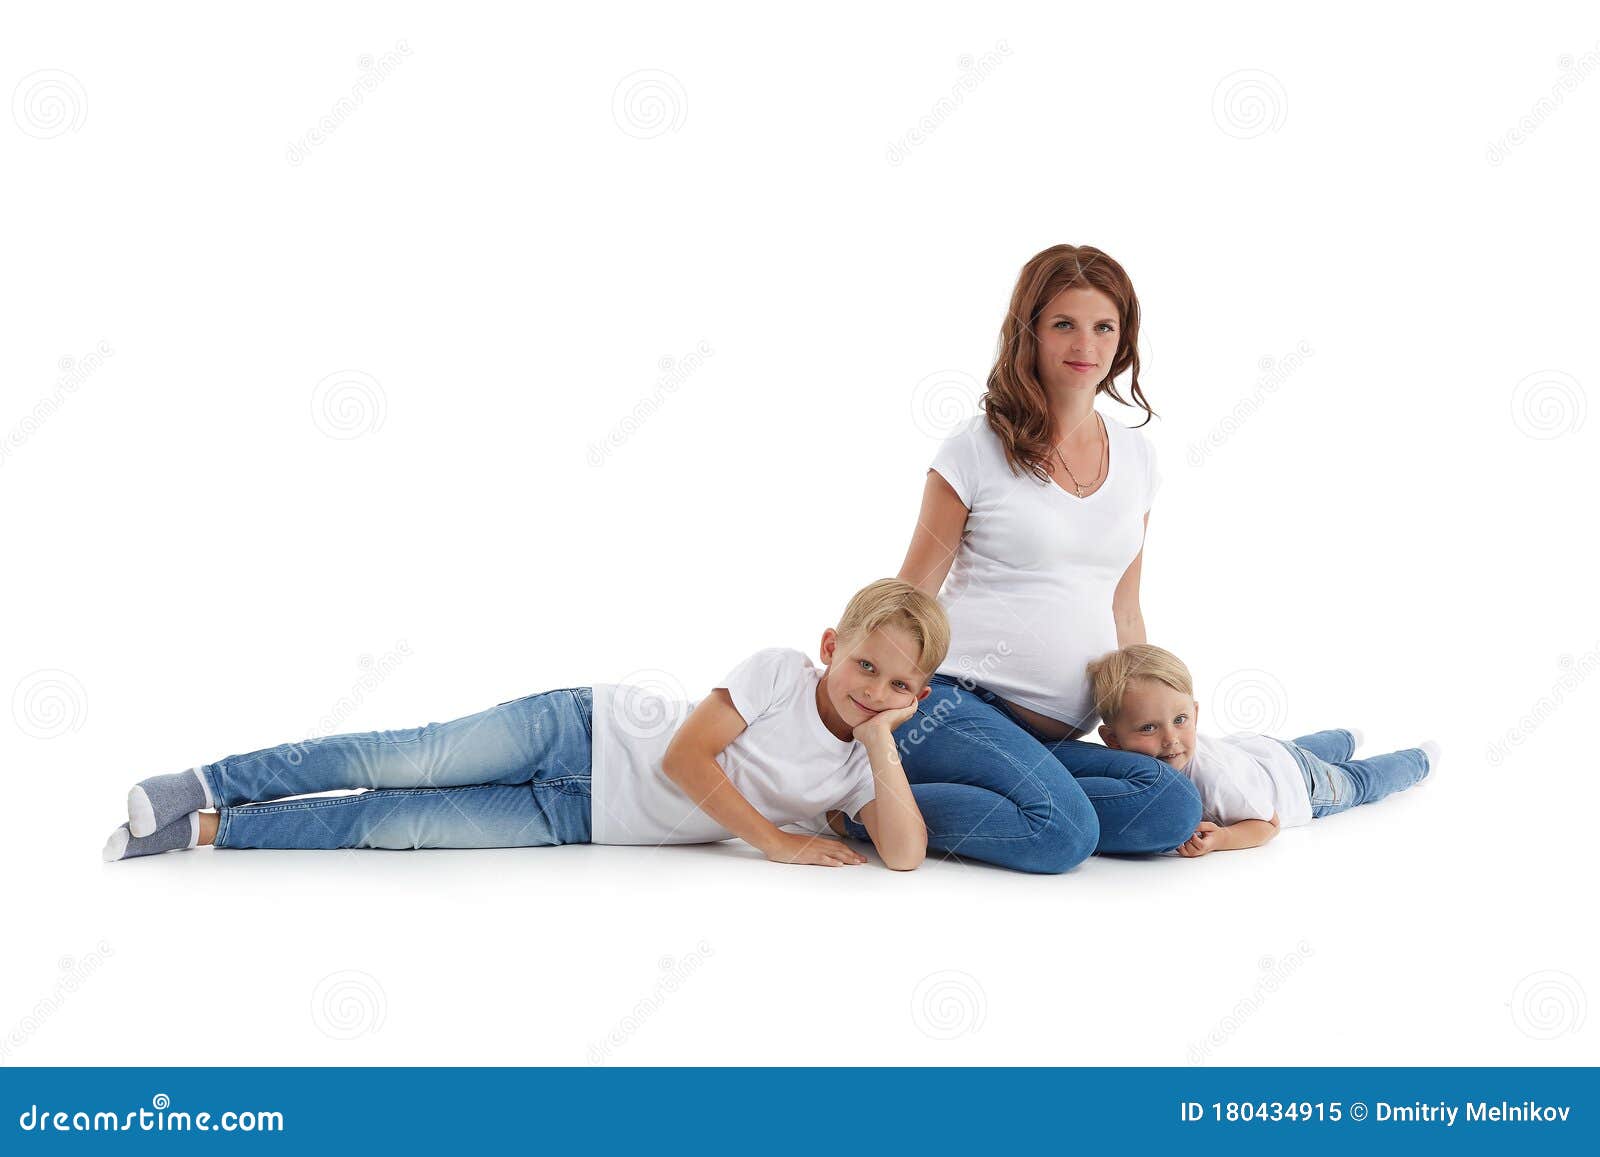 Pregnant Woman With Children Stock Image - Image of group ...